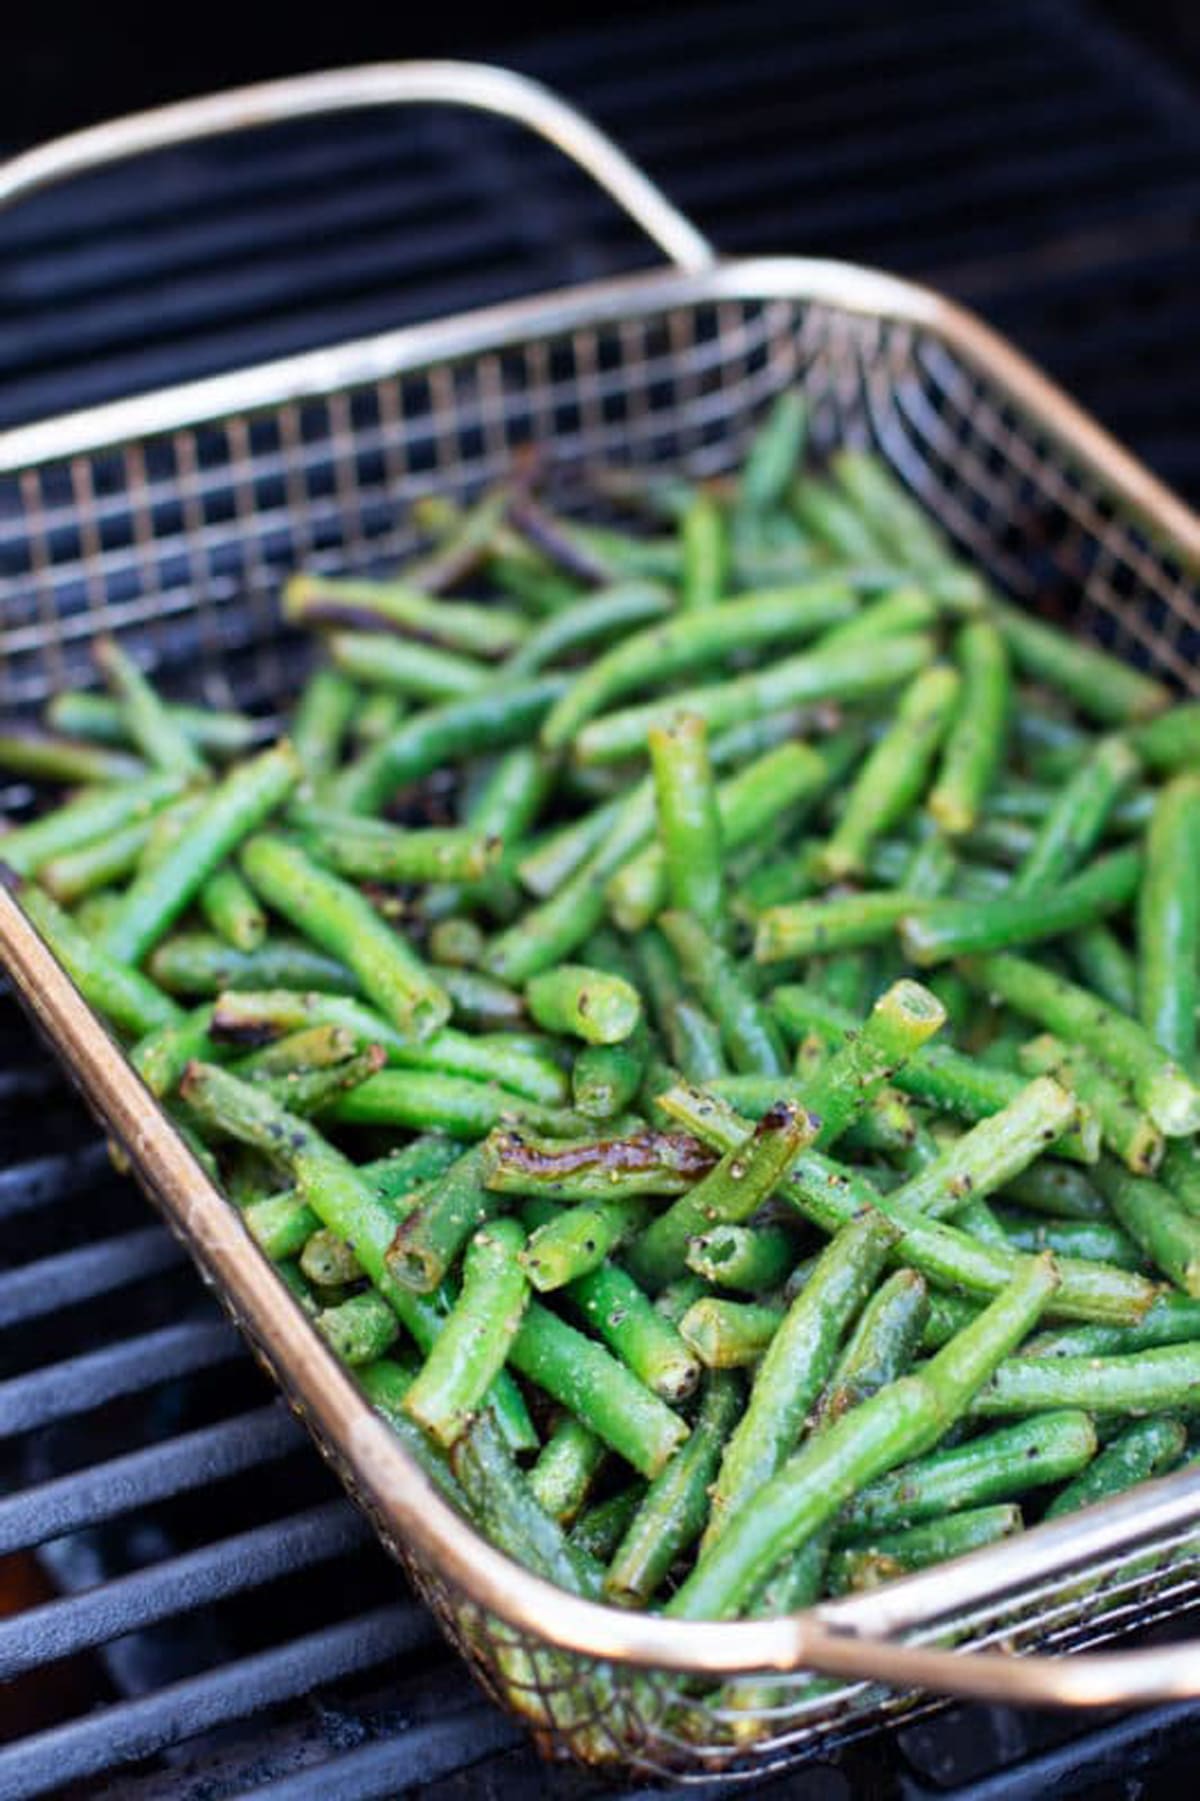 Long green beans in a grilling basket on a grill.